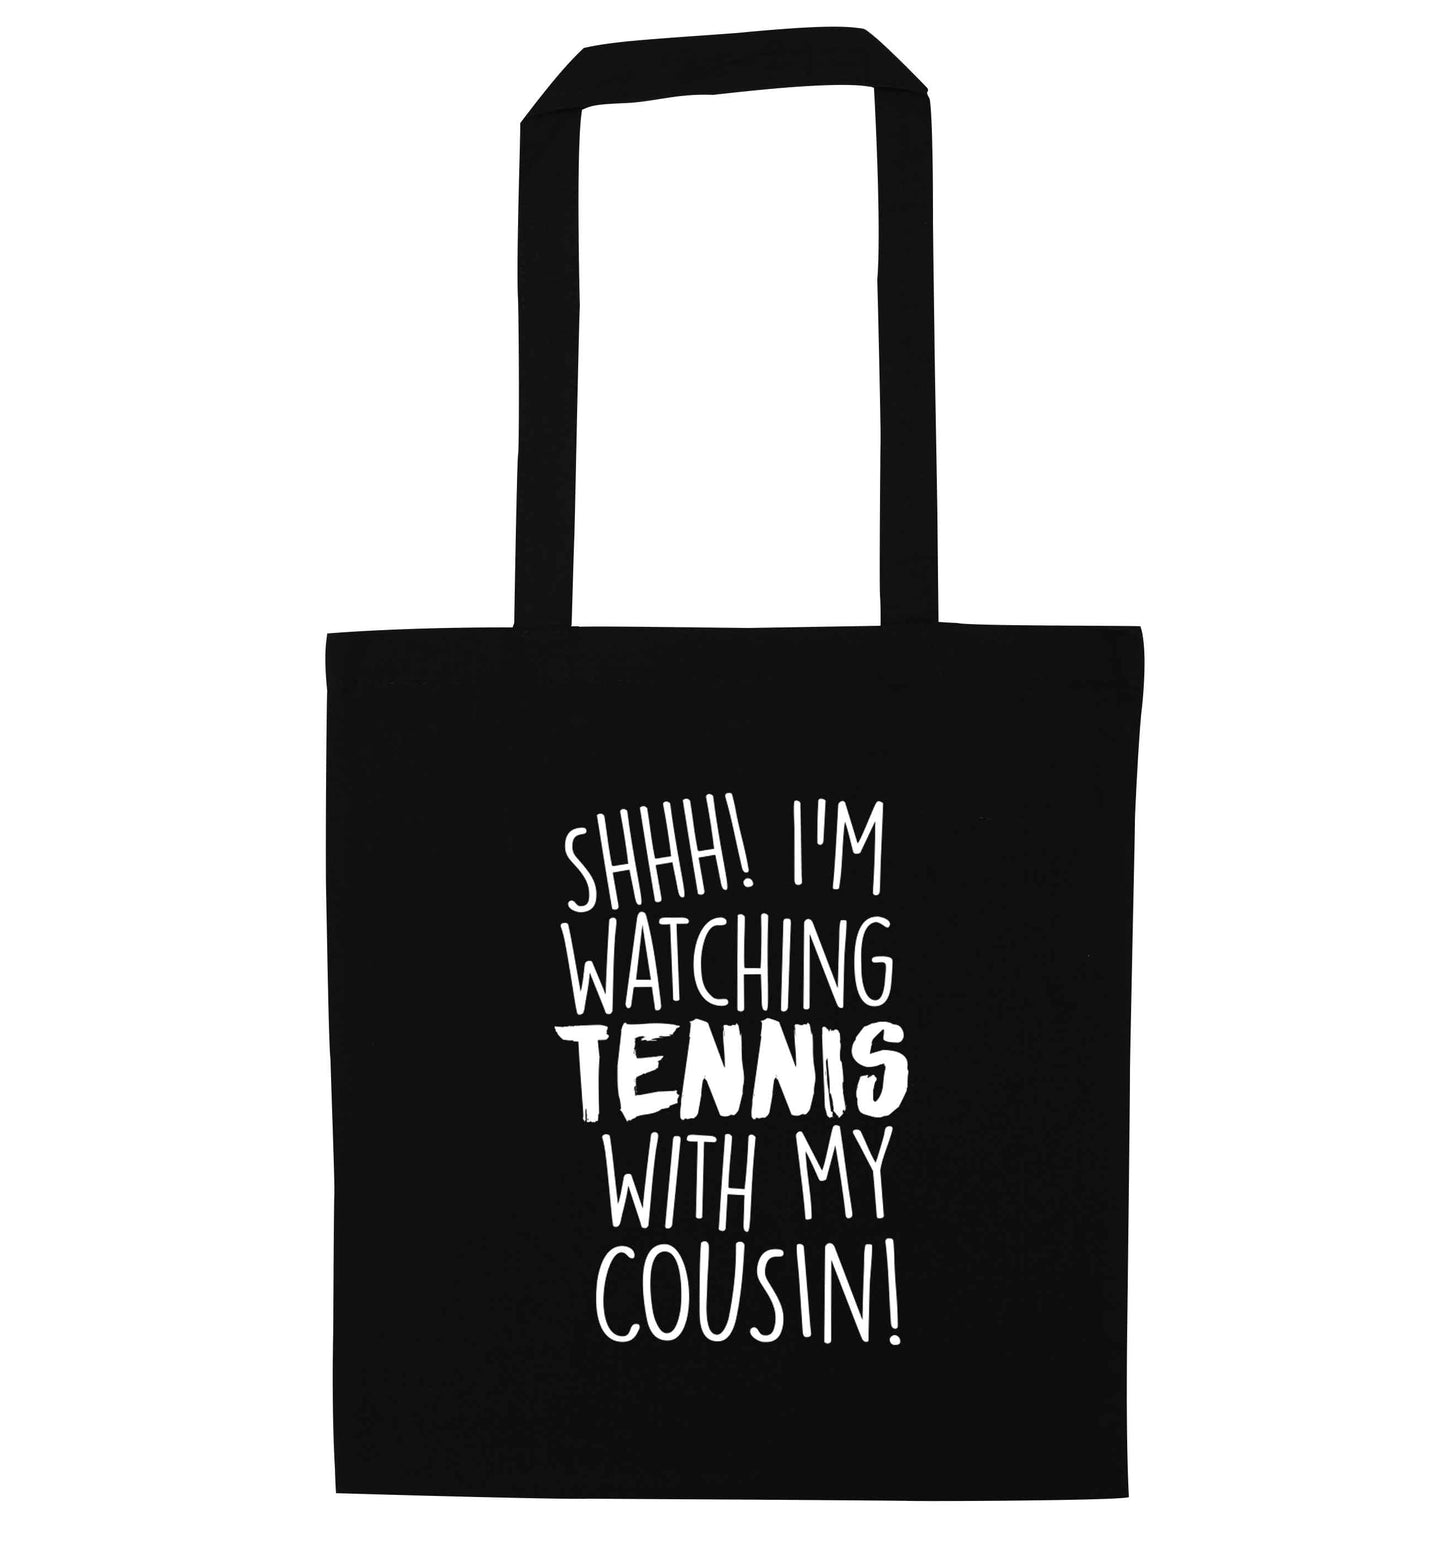 Shh! I'm watching tennis with my cousin! black tote bag